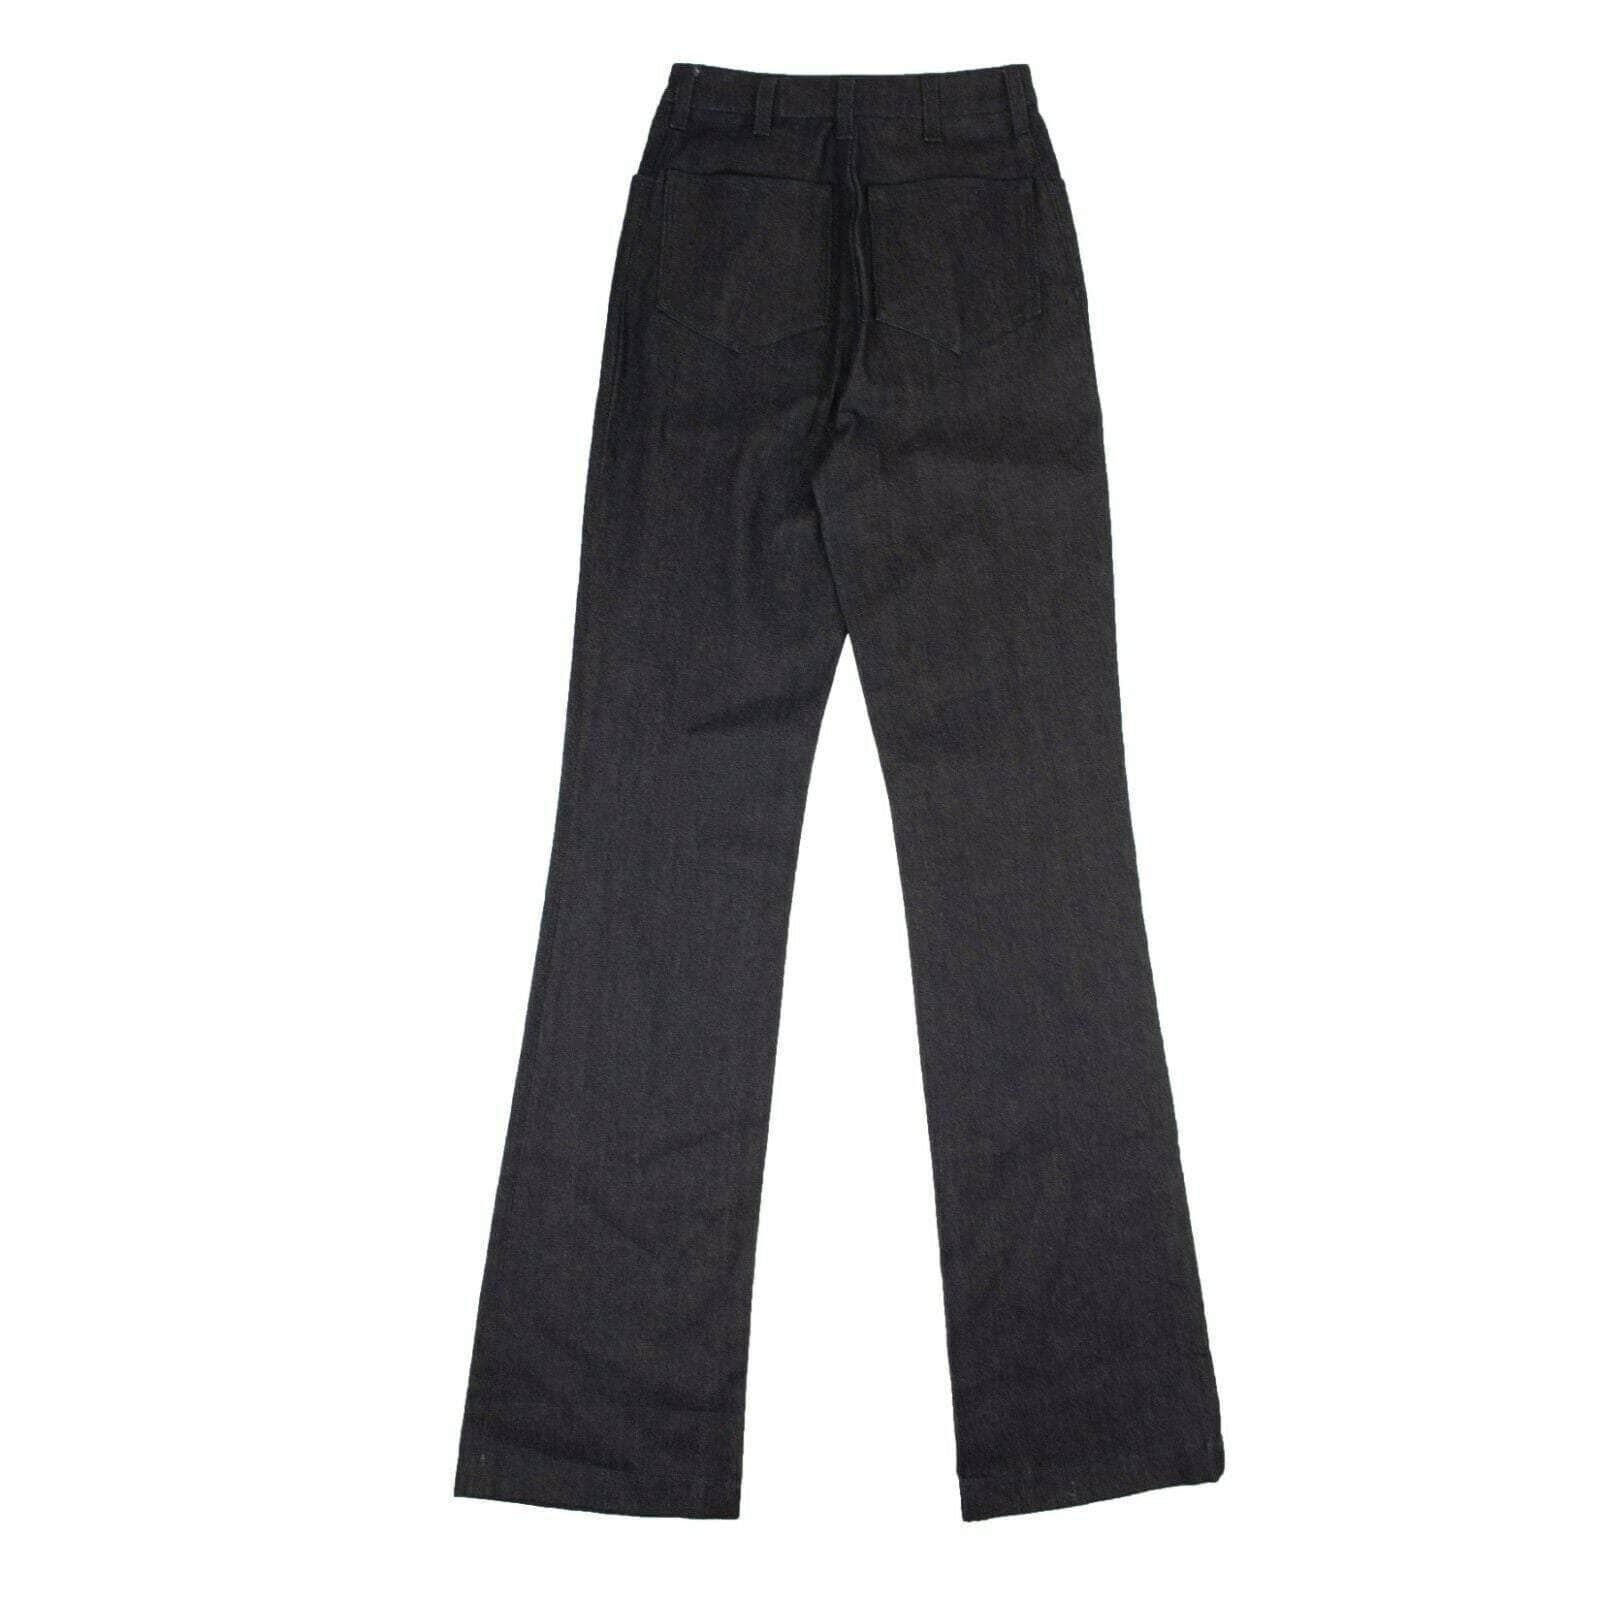 A_PLAN_APPLICATION a_plan_application, channelenable-all, couponcollection, gender-womens, main-accessories, size-26, under-250, womens-jewelry 26 Black Denim High Waisted Jeans 82NGG-AP-46/26 82NGG-AP-46/26